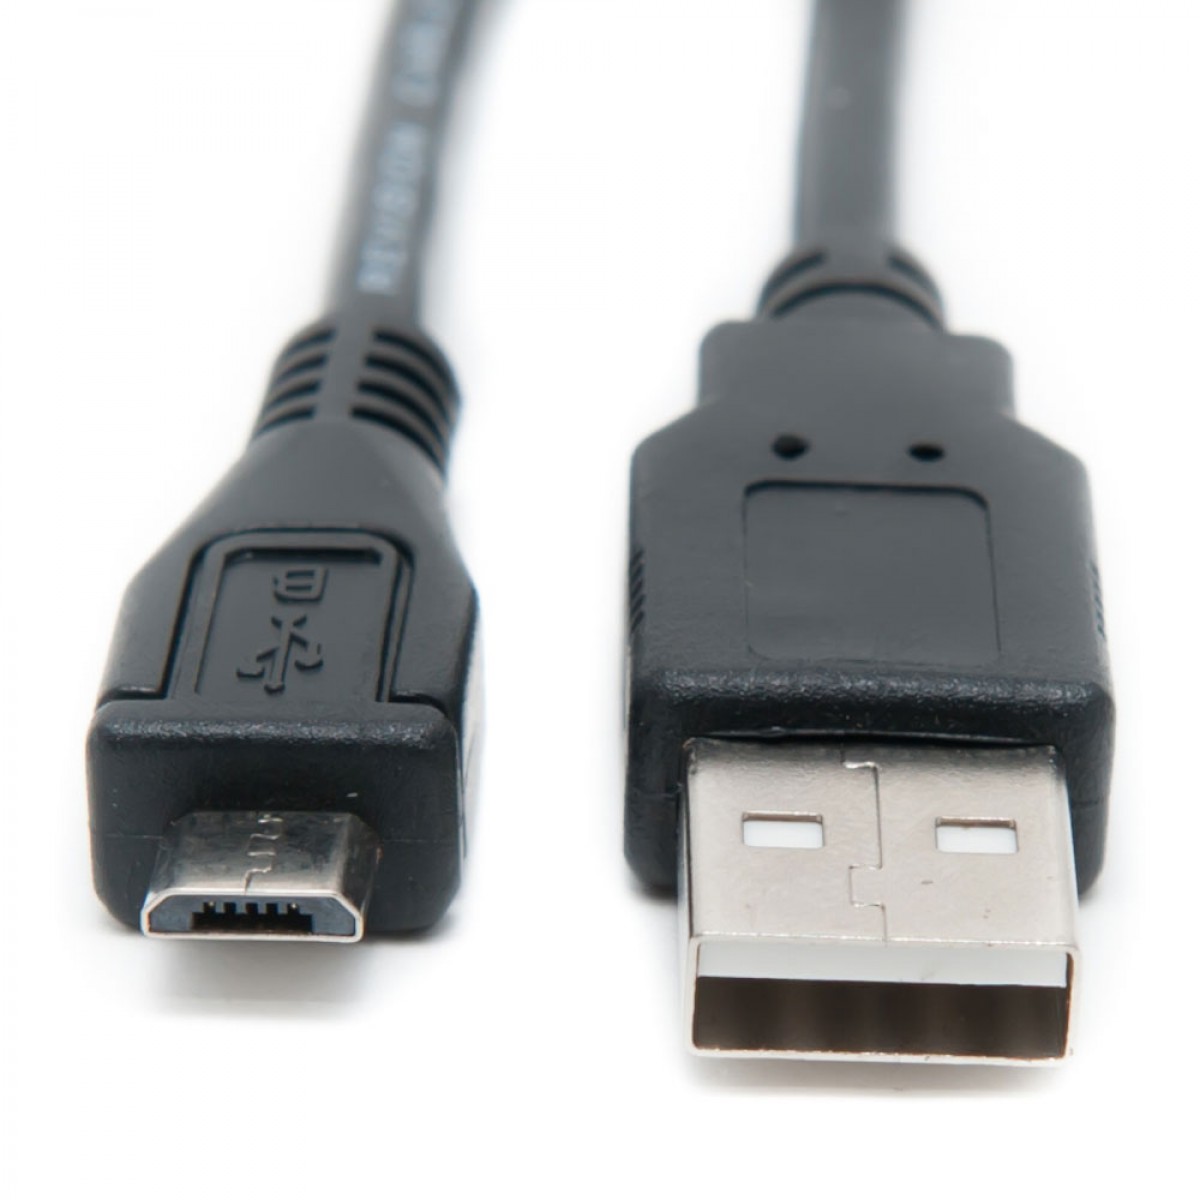 PRO OTG Cable Works for Alcatel OneTouch Fierce 2 Right Angle Cable Connects You to Any Compatible USB Device with MicroUSB 